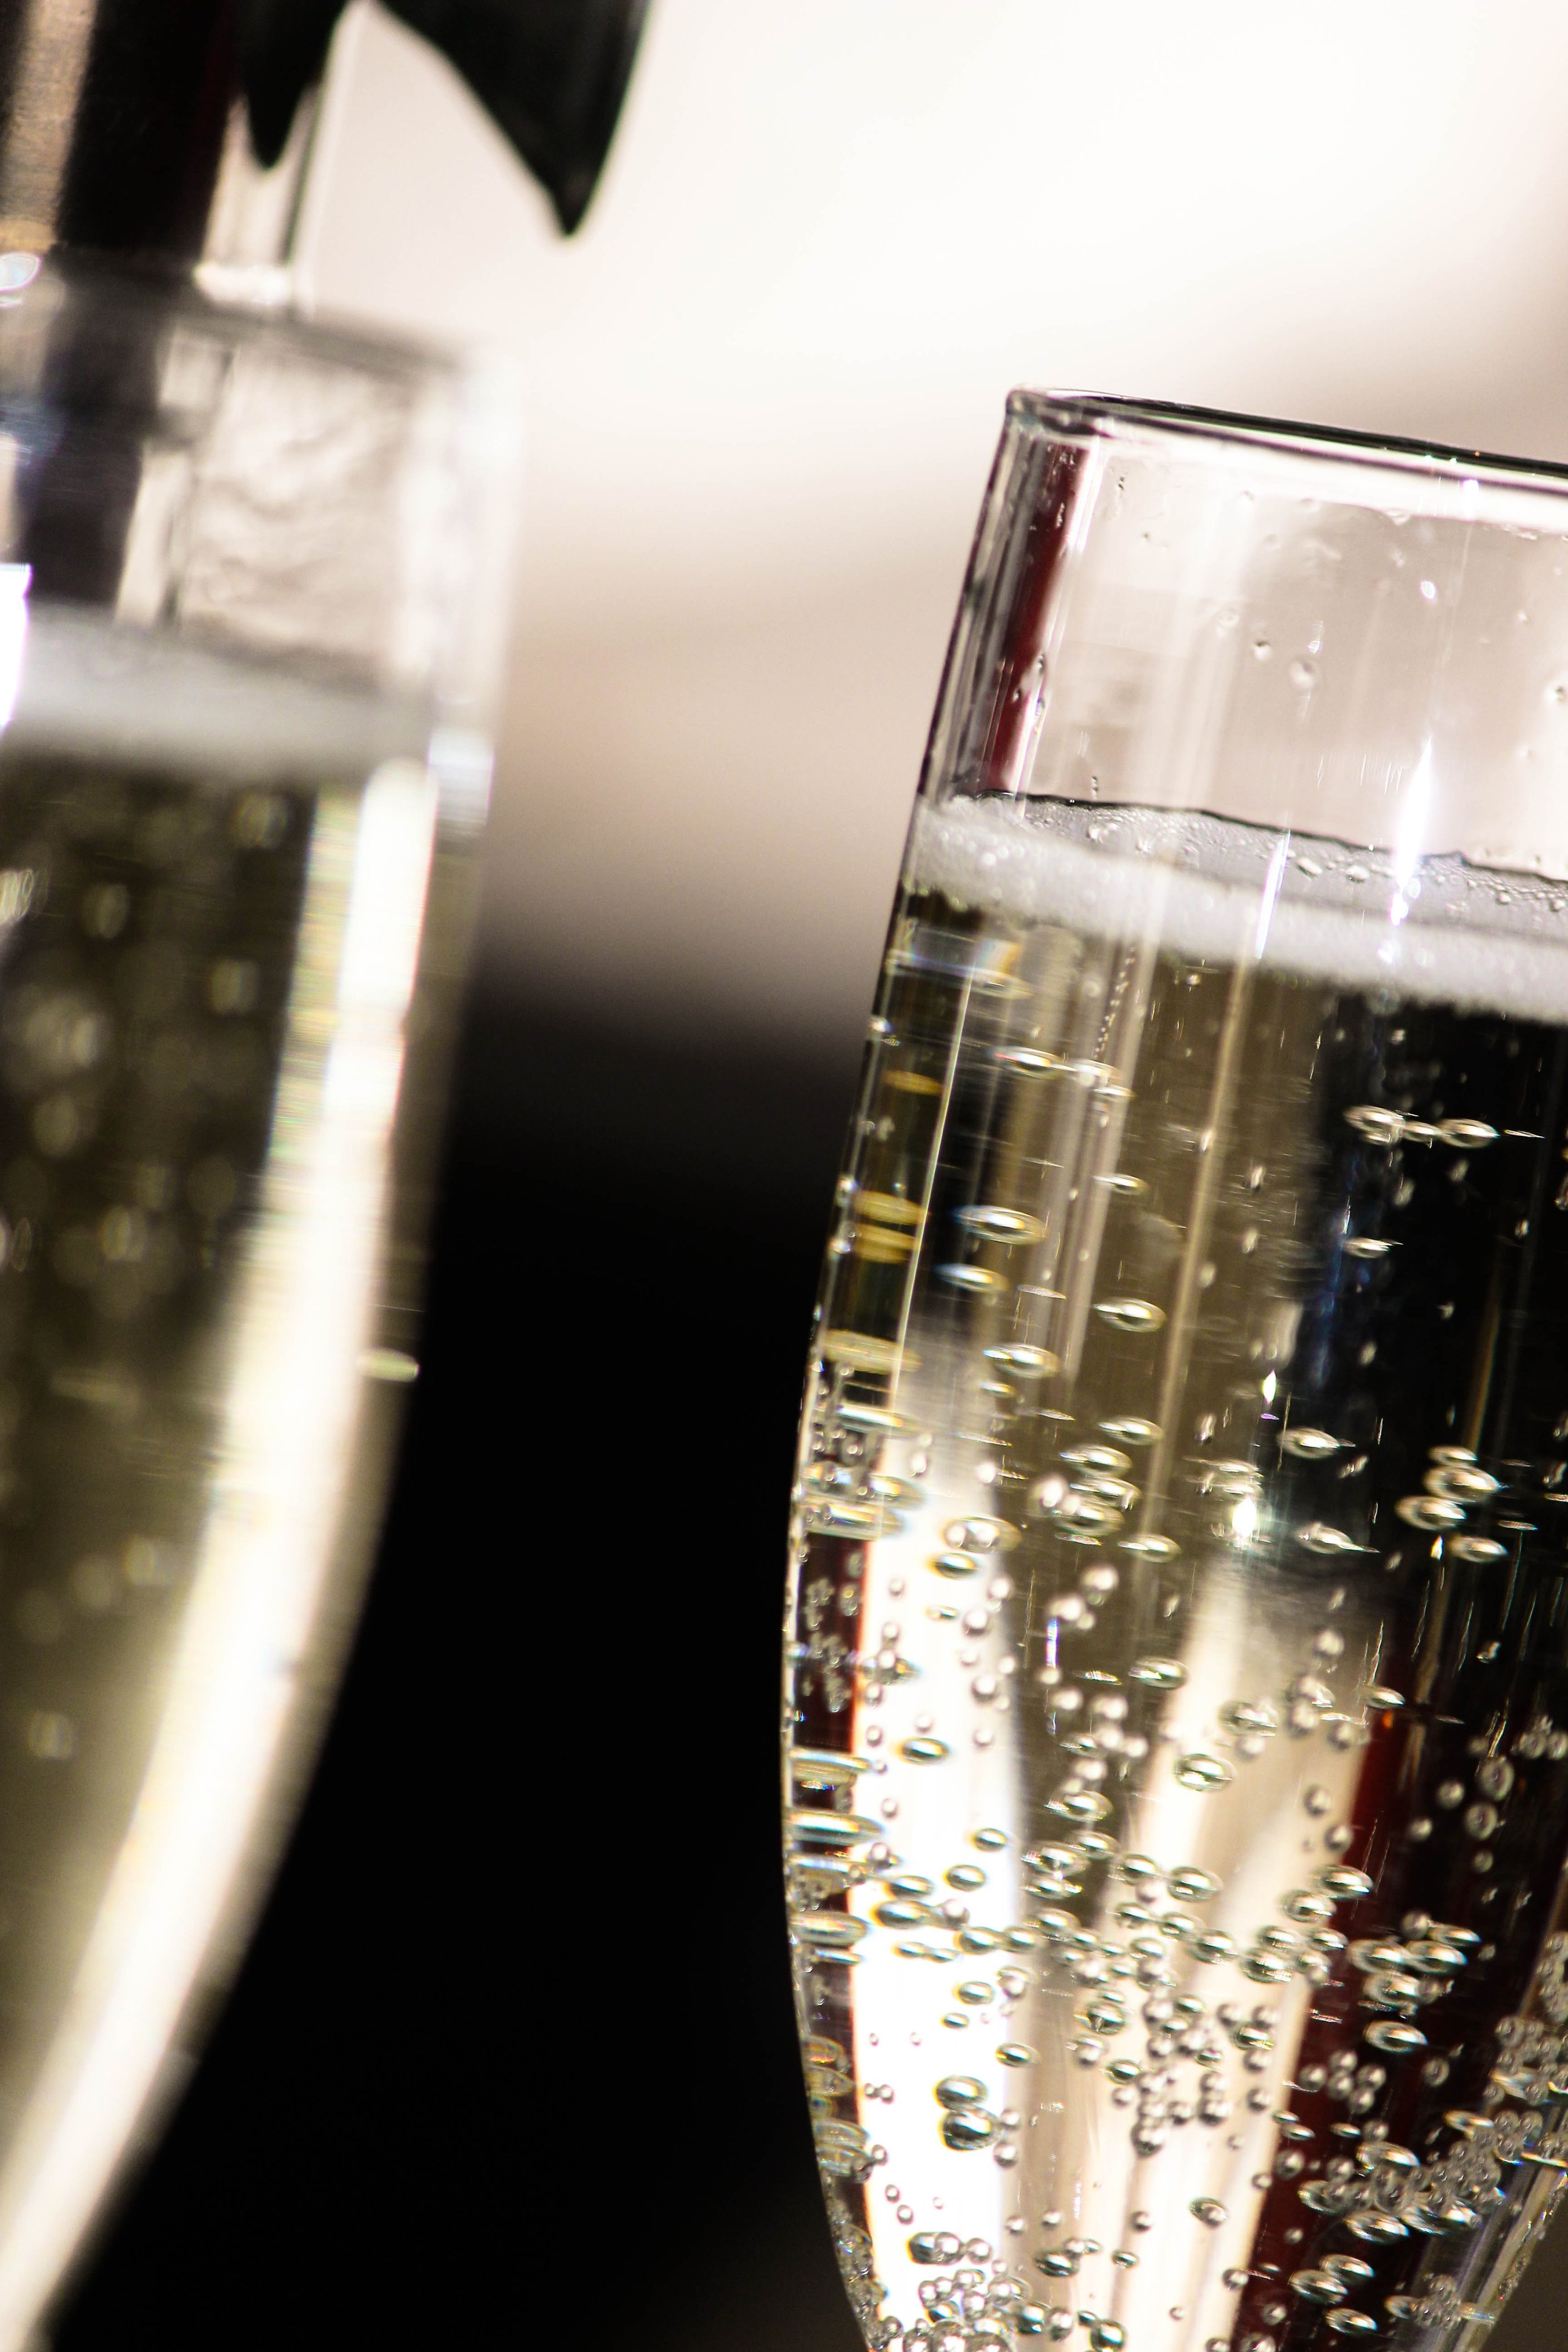 What Is the Best Type of Glass for Sparkling Wine?